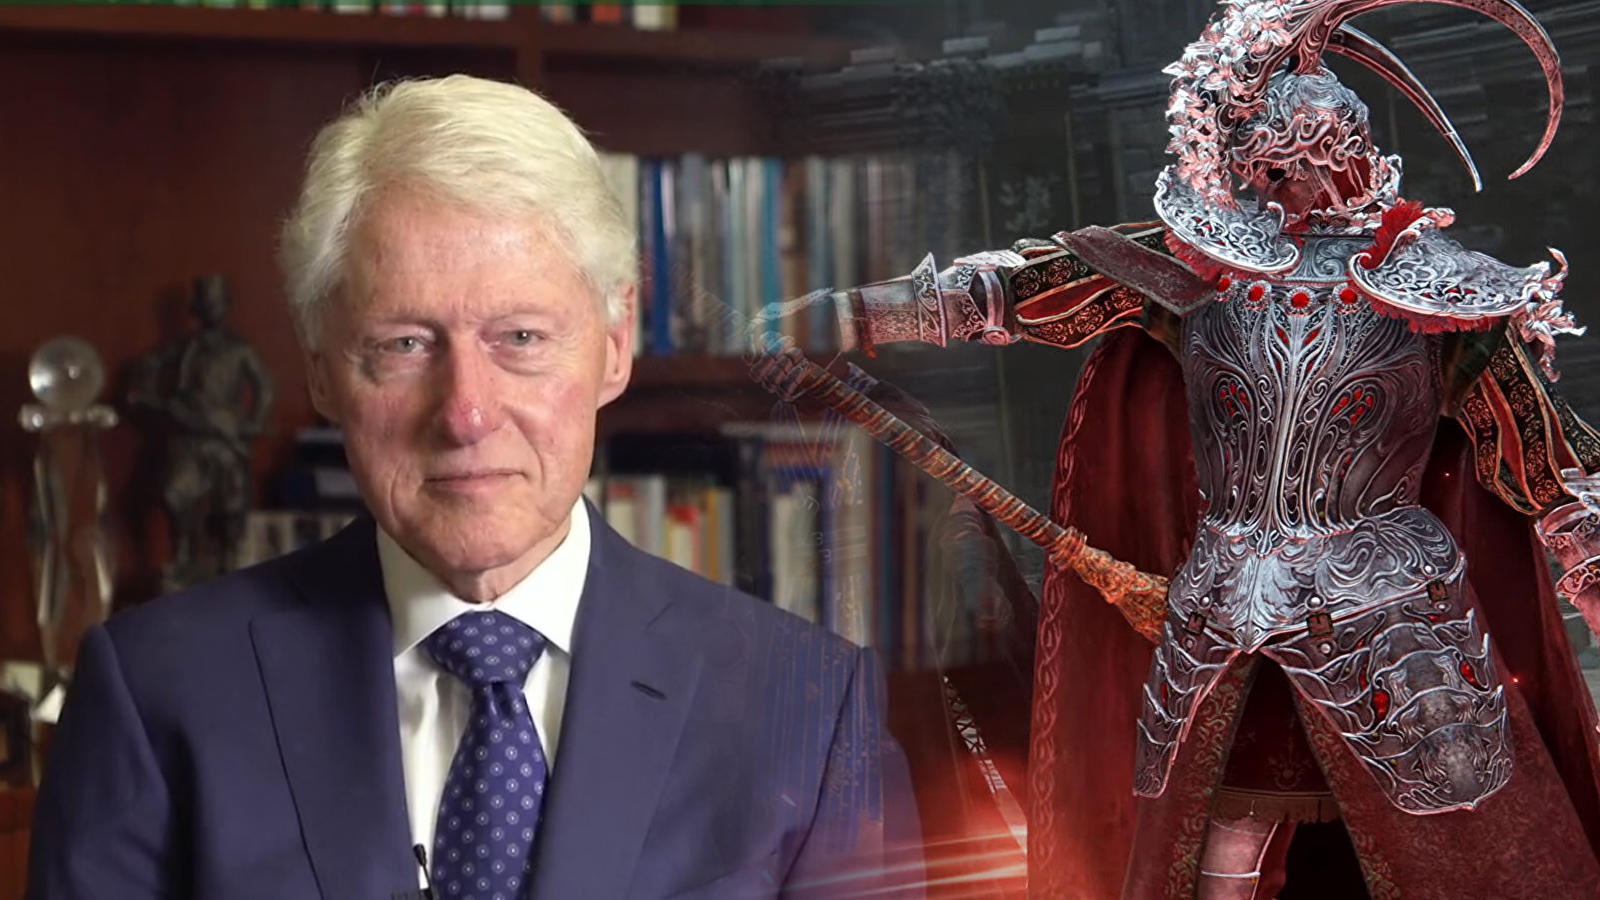 Elden Ring: Bill Clinton Mod Surfaces After Game Awards Stage